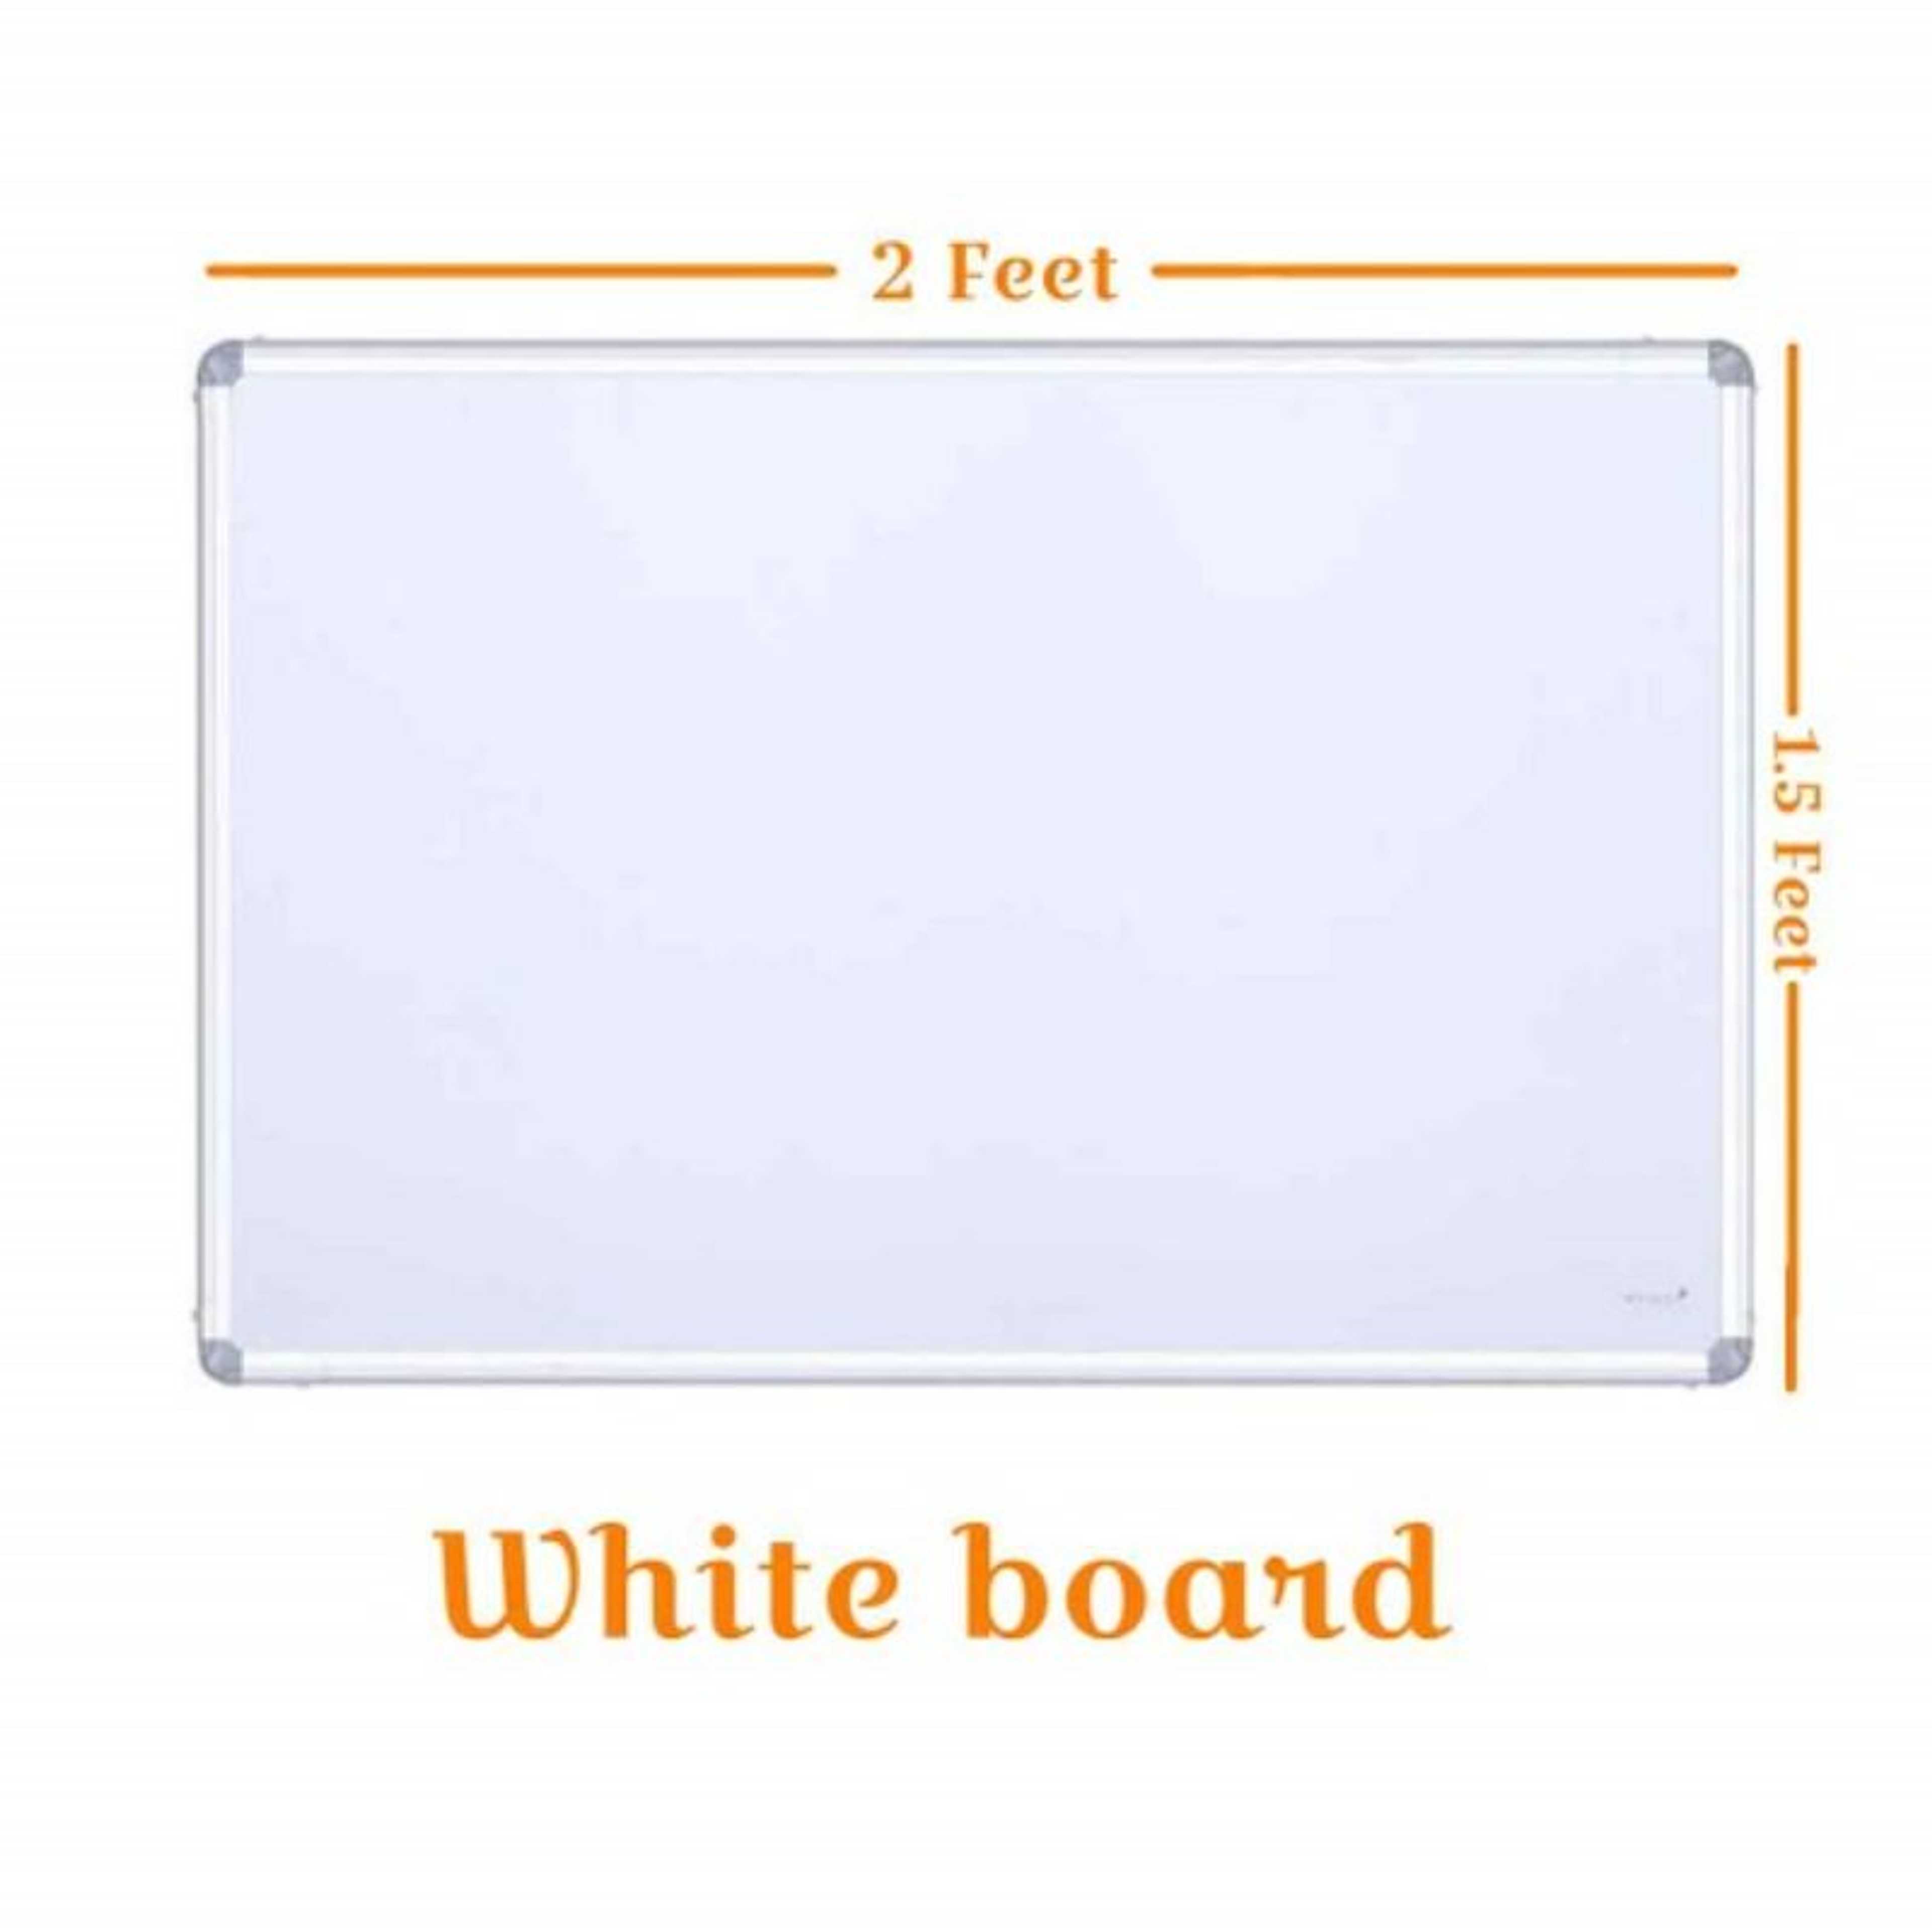 1.5ft x 2ft Dry Erase White Board Hanging Writing Drawing & Planning Whiteboard